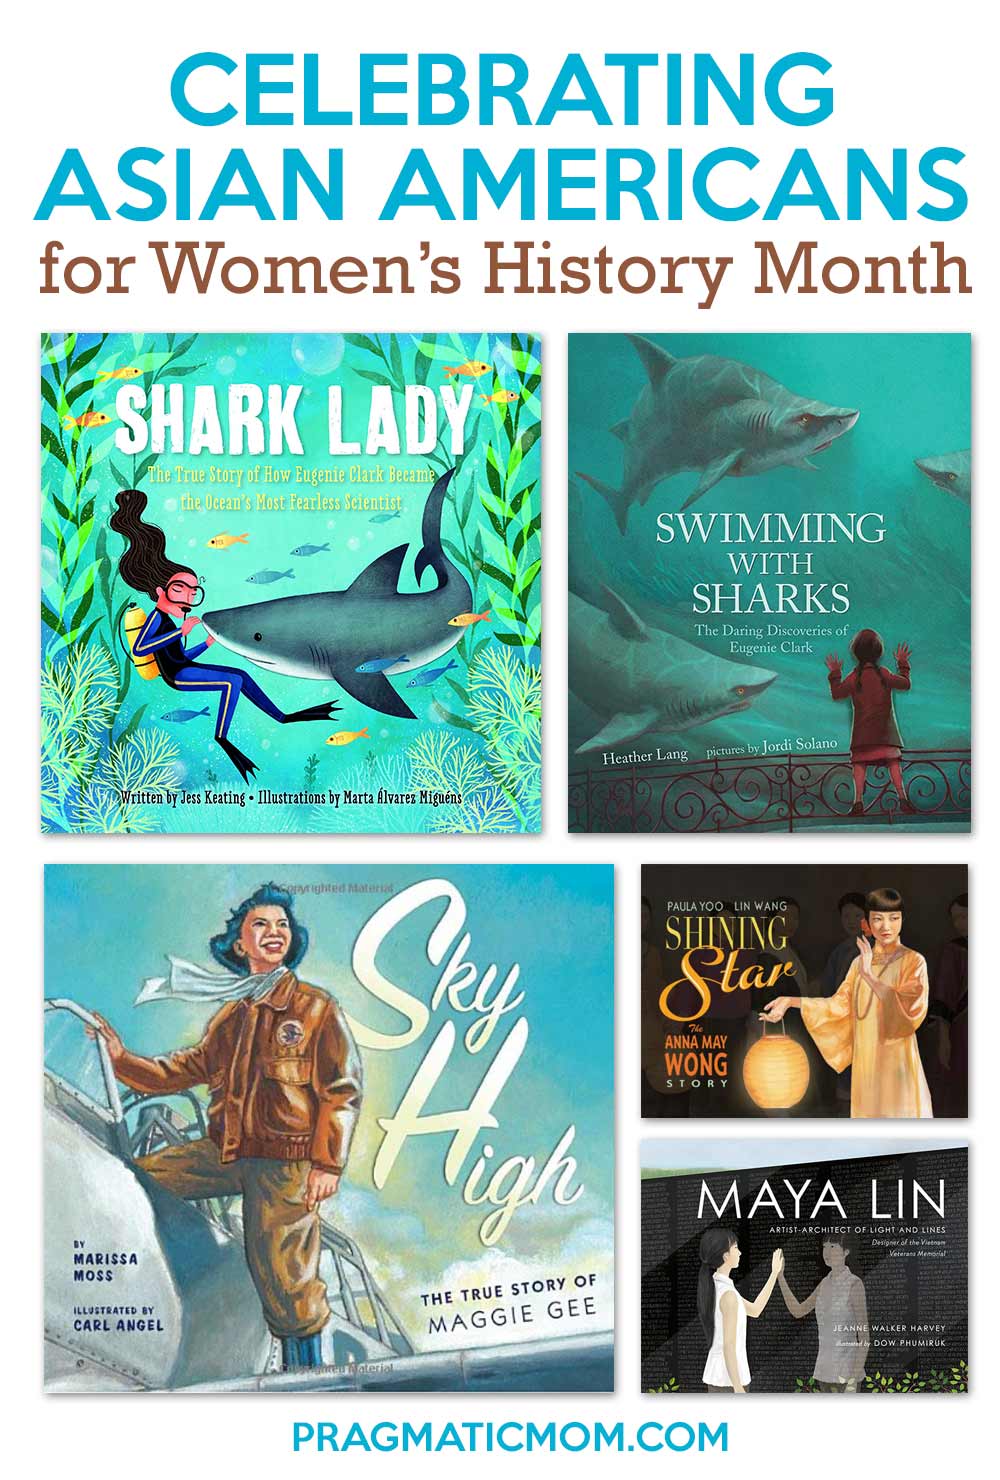 Celebrating Asian Americans for Women's History Month